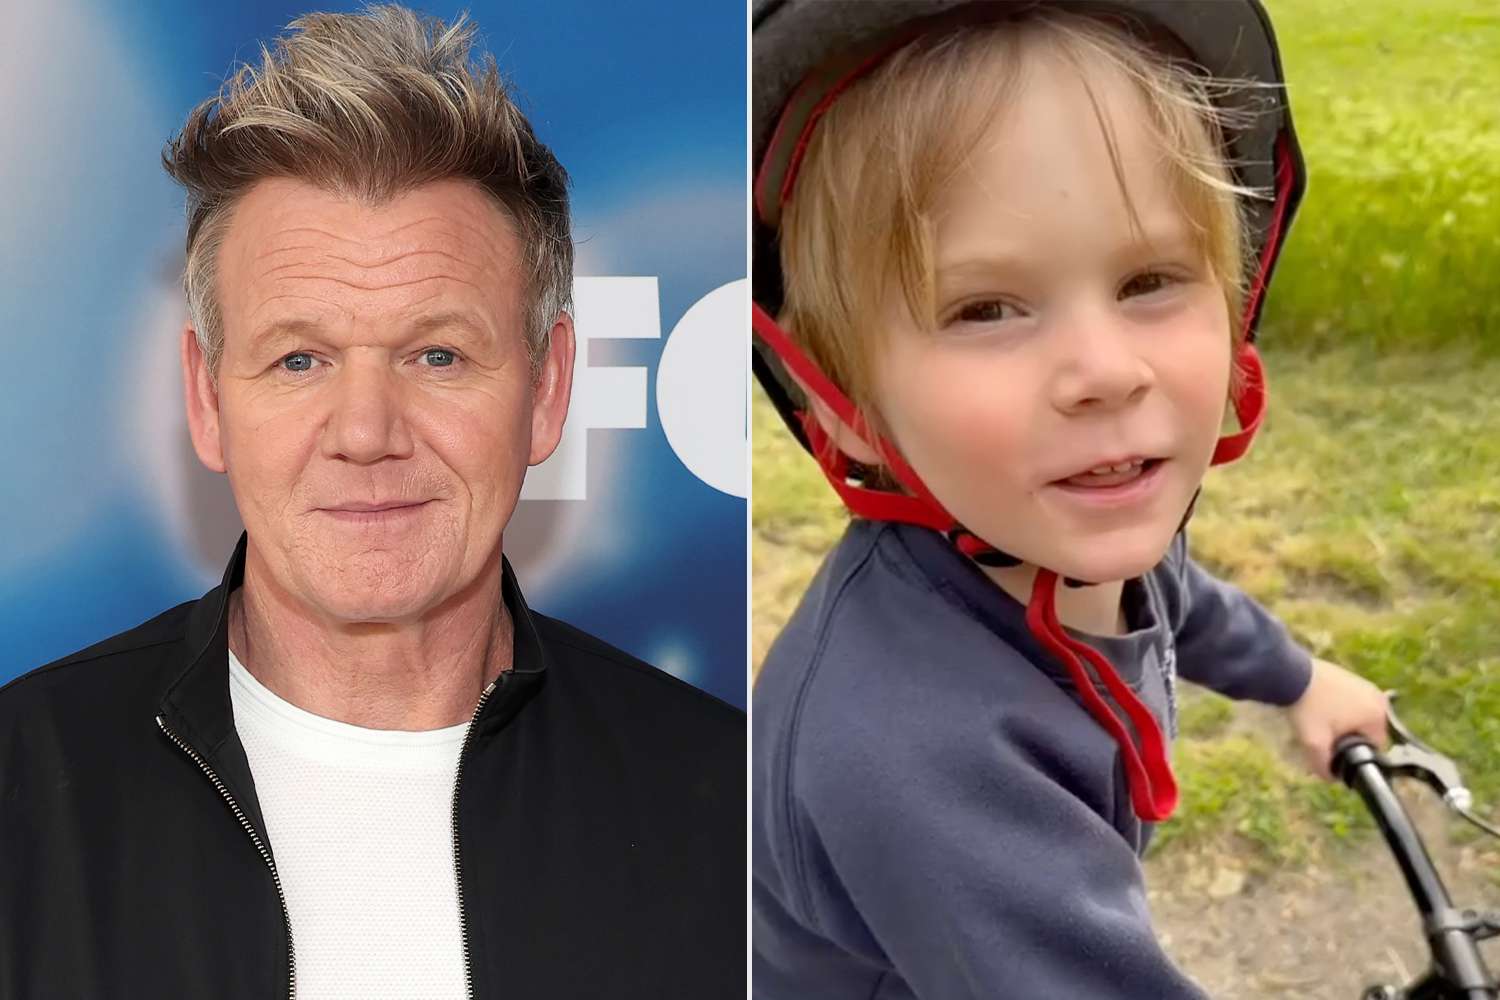 Gordon Ramsay Says Hes On the Mend’ After Biking Accident and Shares Video of Son Oscar, 5, Wearing Helmet